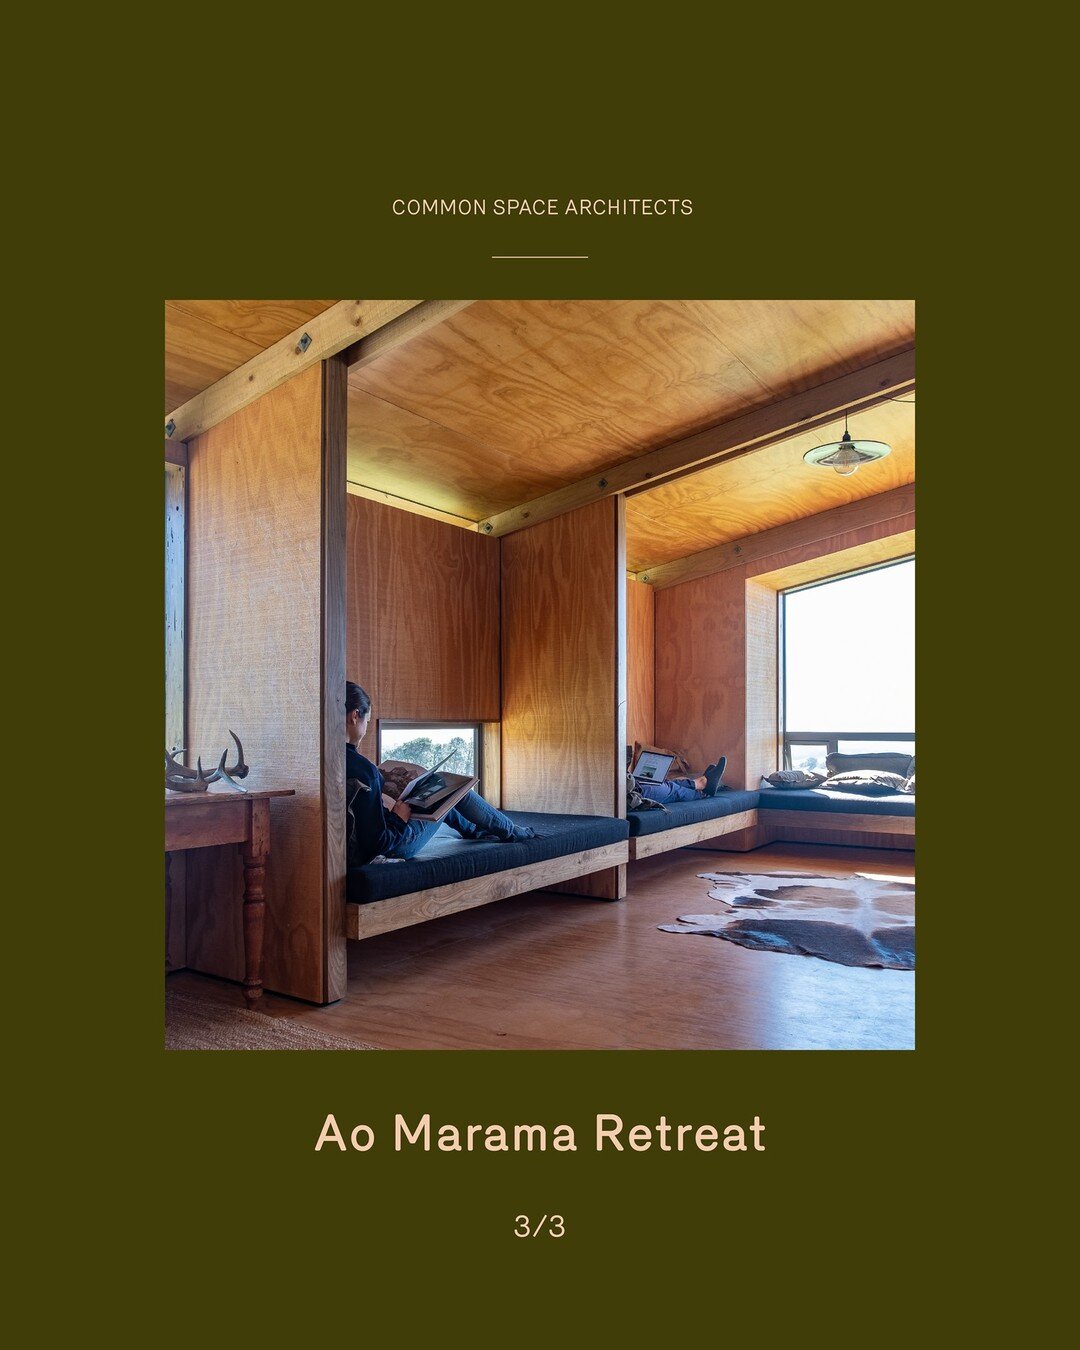 Ao Marama Retreat 3/3⁠
⁠
&ldquo;By day, there is a spectacular view over the Bay of Plenty to the sea and by night, the lights of Mount Maunganui spread out down below.&rdquo; ⁠
⁠
-  Here Magazine Summer Issue 2020⁠
_________⁠
Read more about this pr